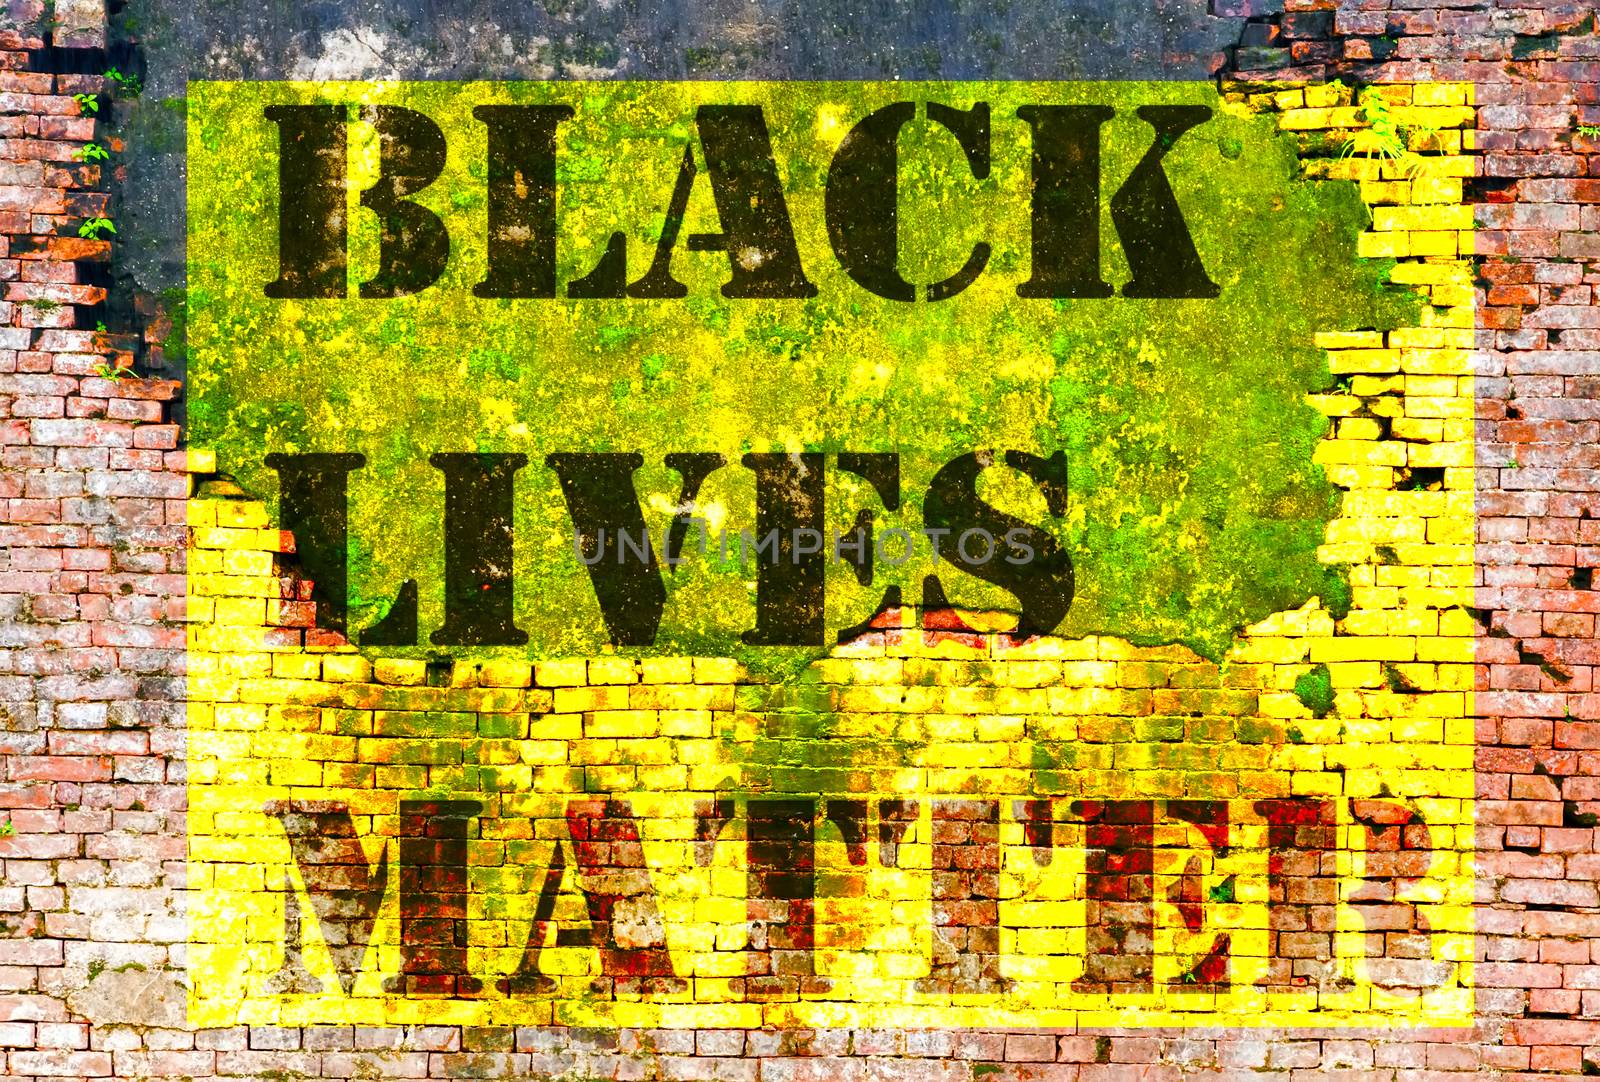 Black Lives Matter slogan protestors anti Black racism african American yellow stencil pattern wall cracked texture